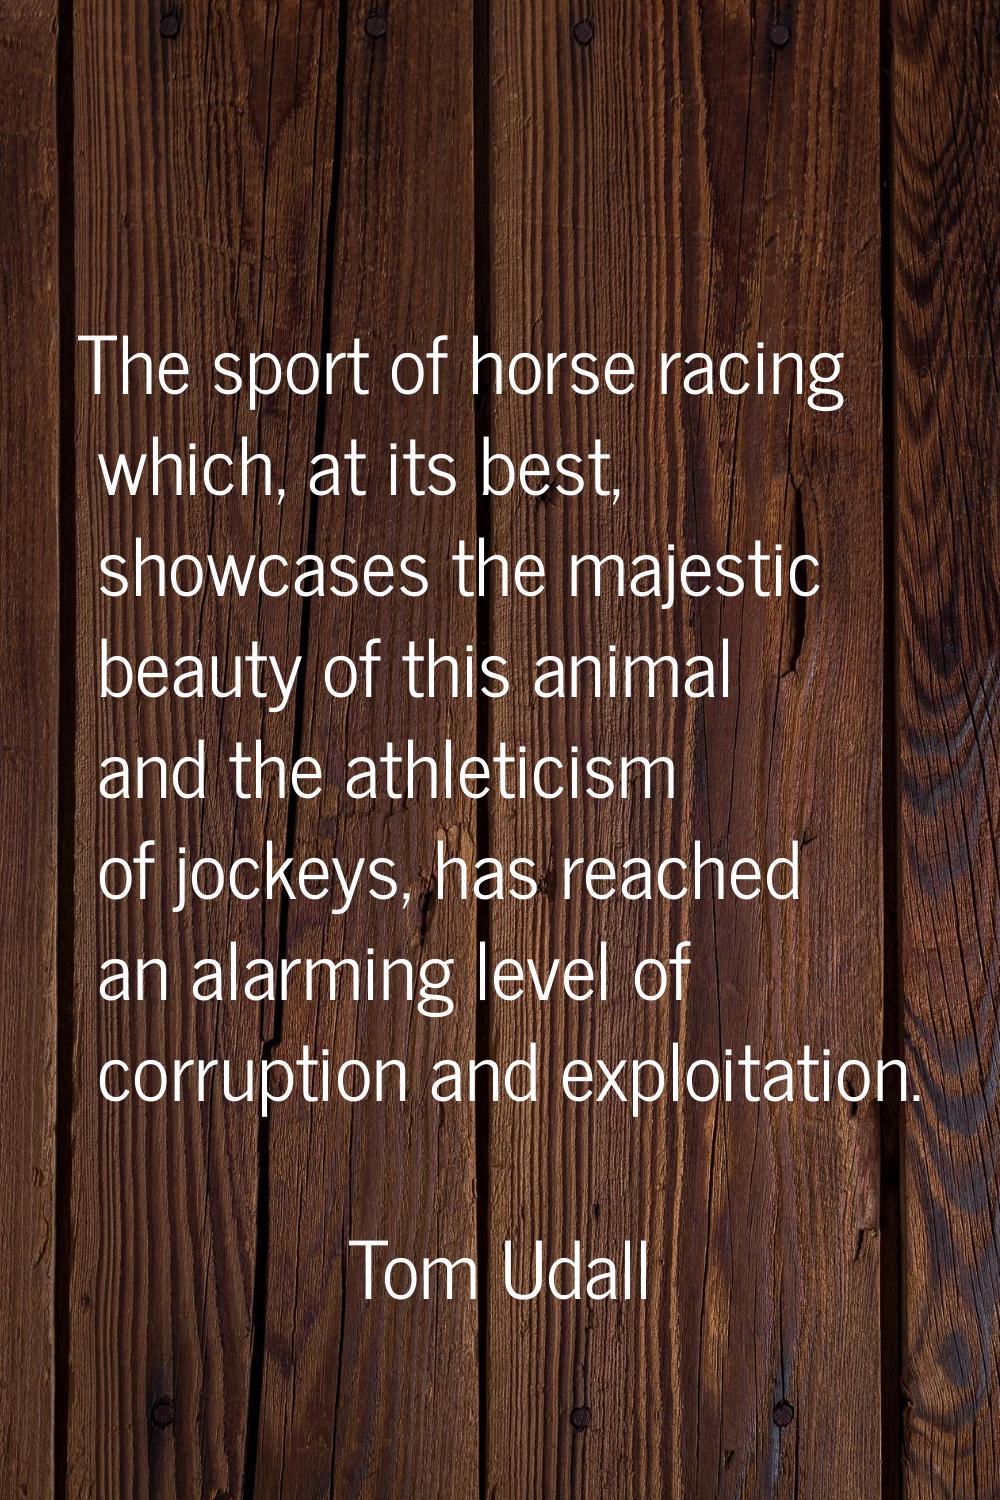 The sport of horse racing which, at its best, showcases the majestic beauty of this animal and the 